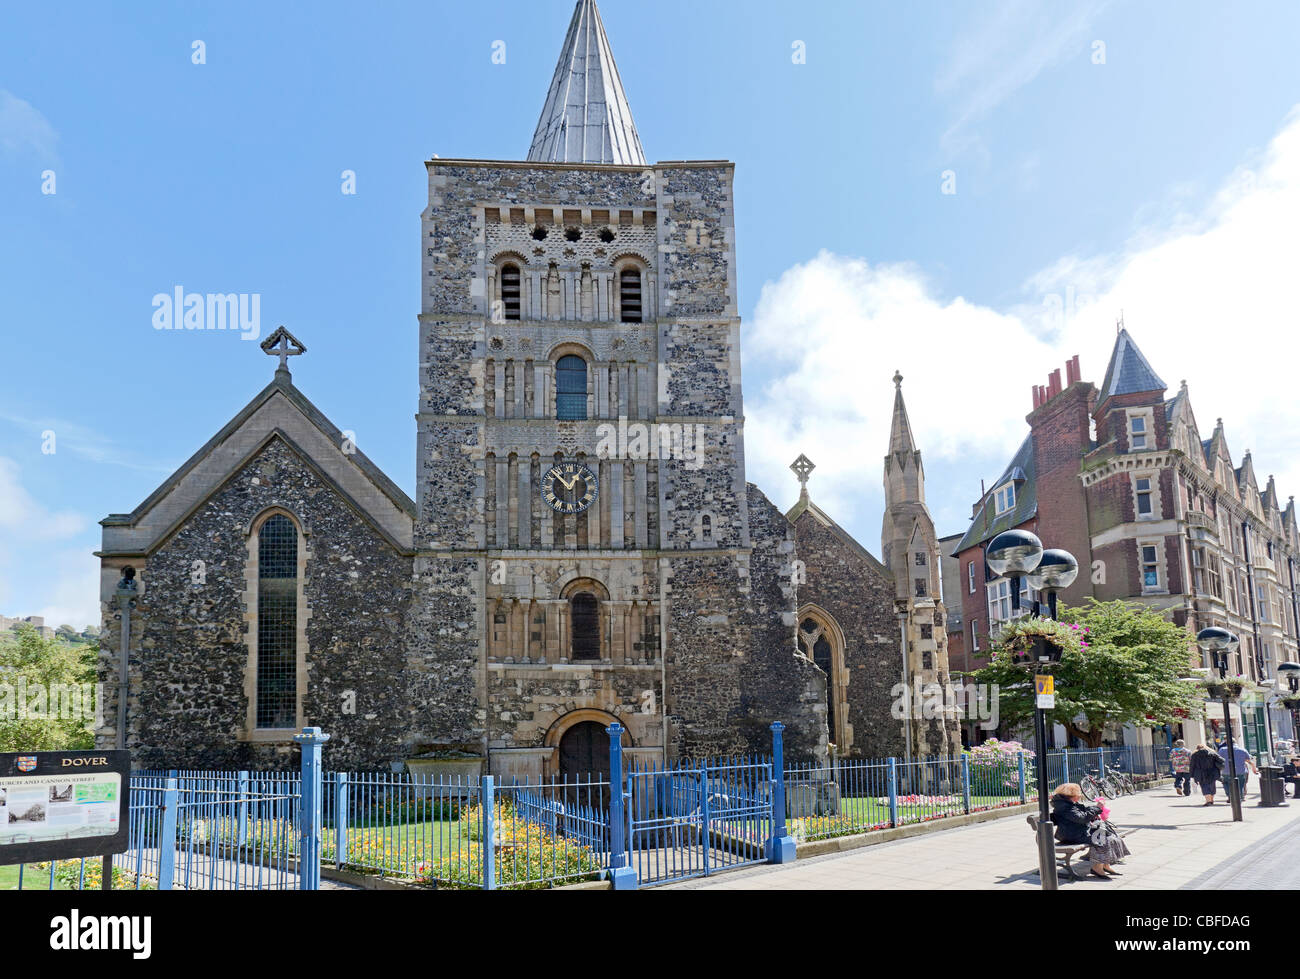 A view of St. Mary's Parish Centre on Cannon Street, Dover, England. Stock Photo